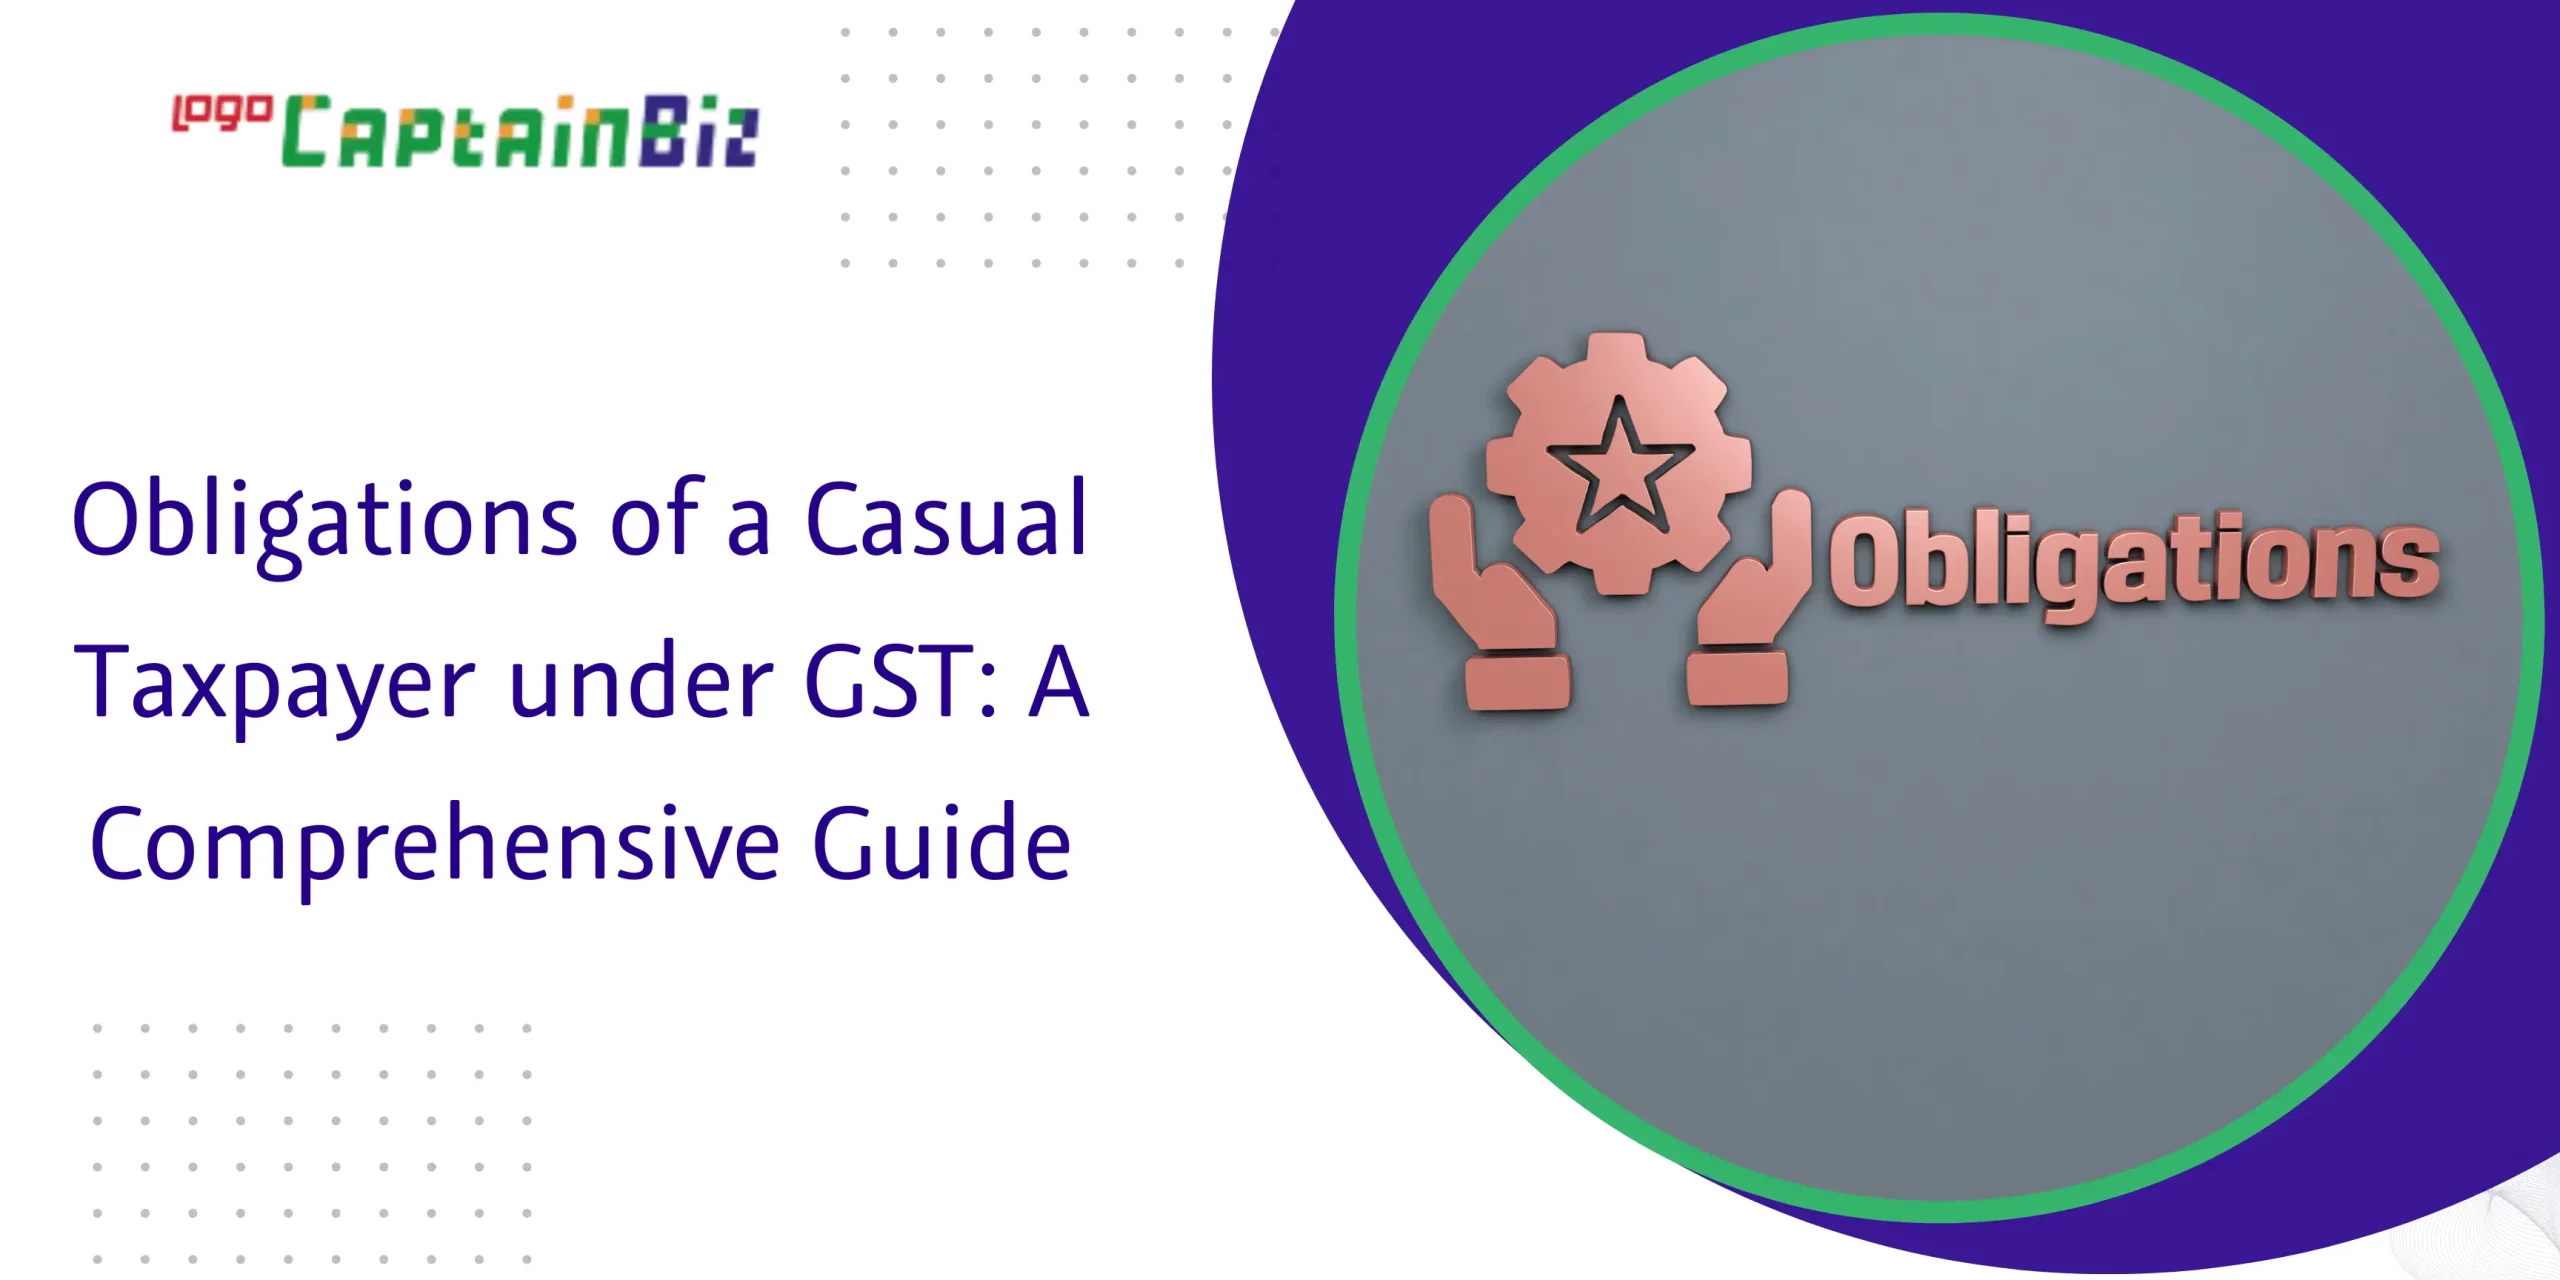 CaptainBiz: obligations of a casual taxpayer under gst: a comprehensive guide